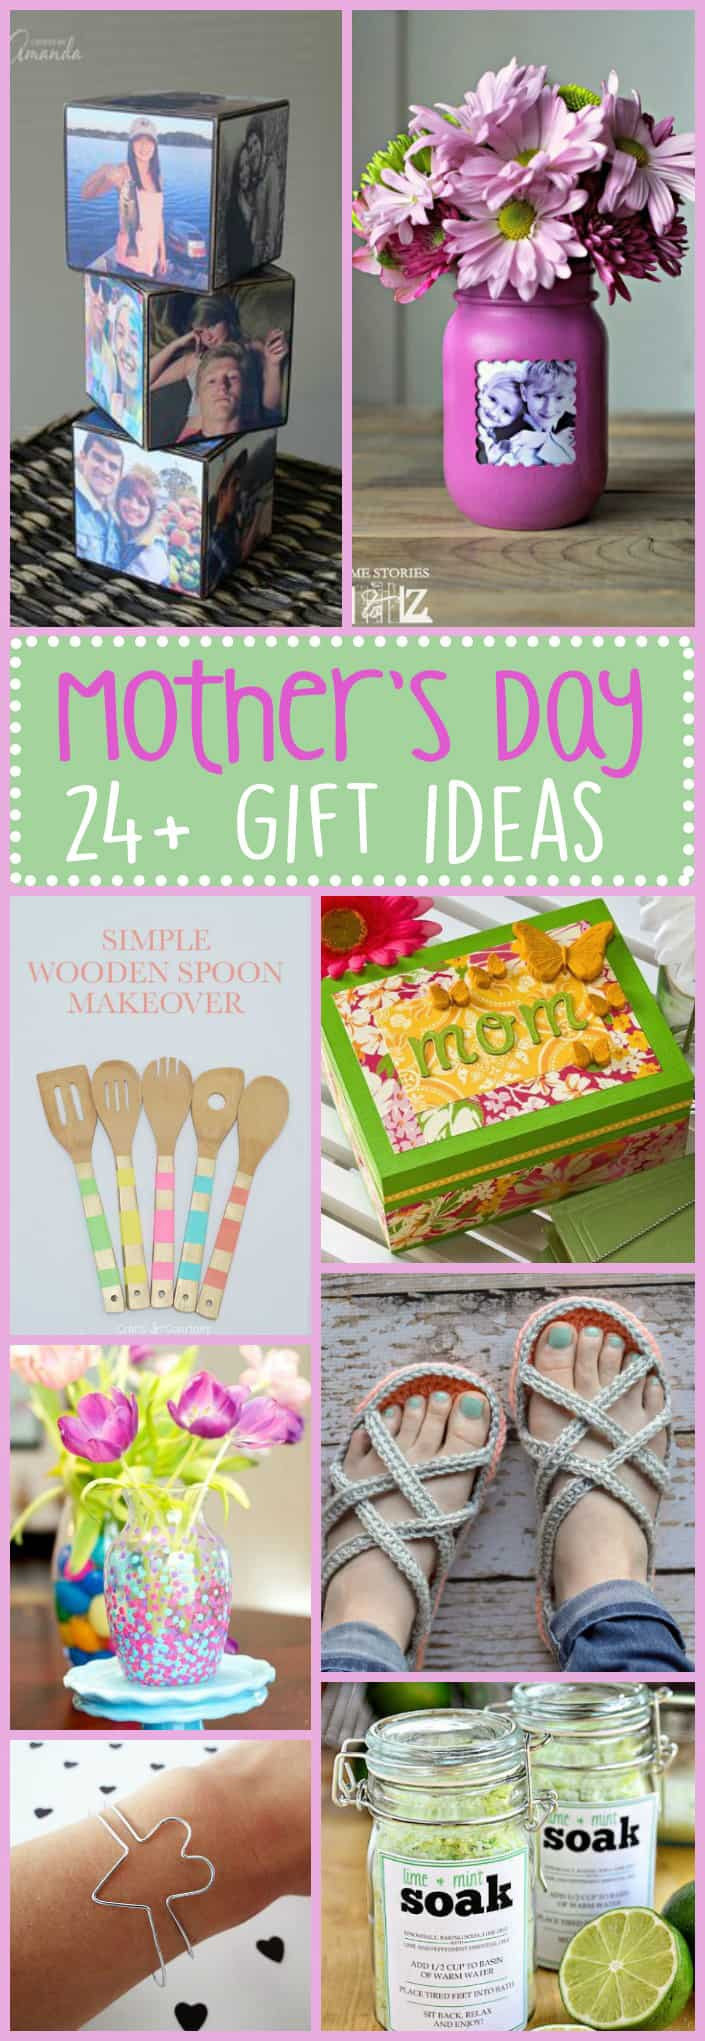 Amazon Mothers Day Gift Ideas
 Mother s Day Gift Ideas 24 t ideas for Mother s Day